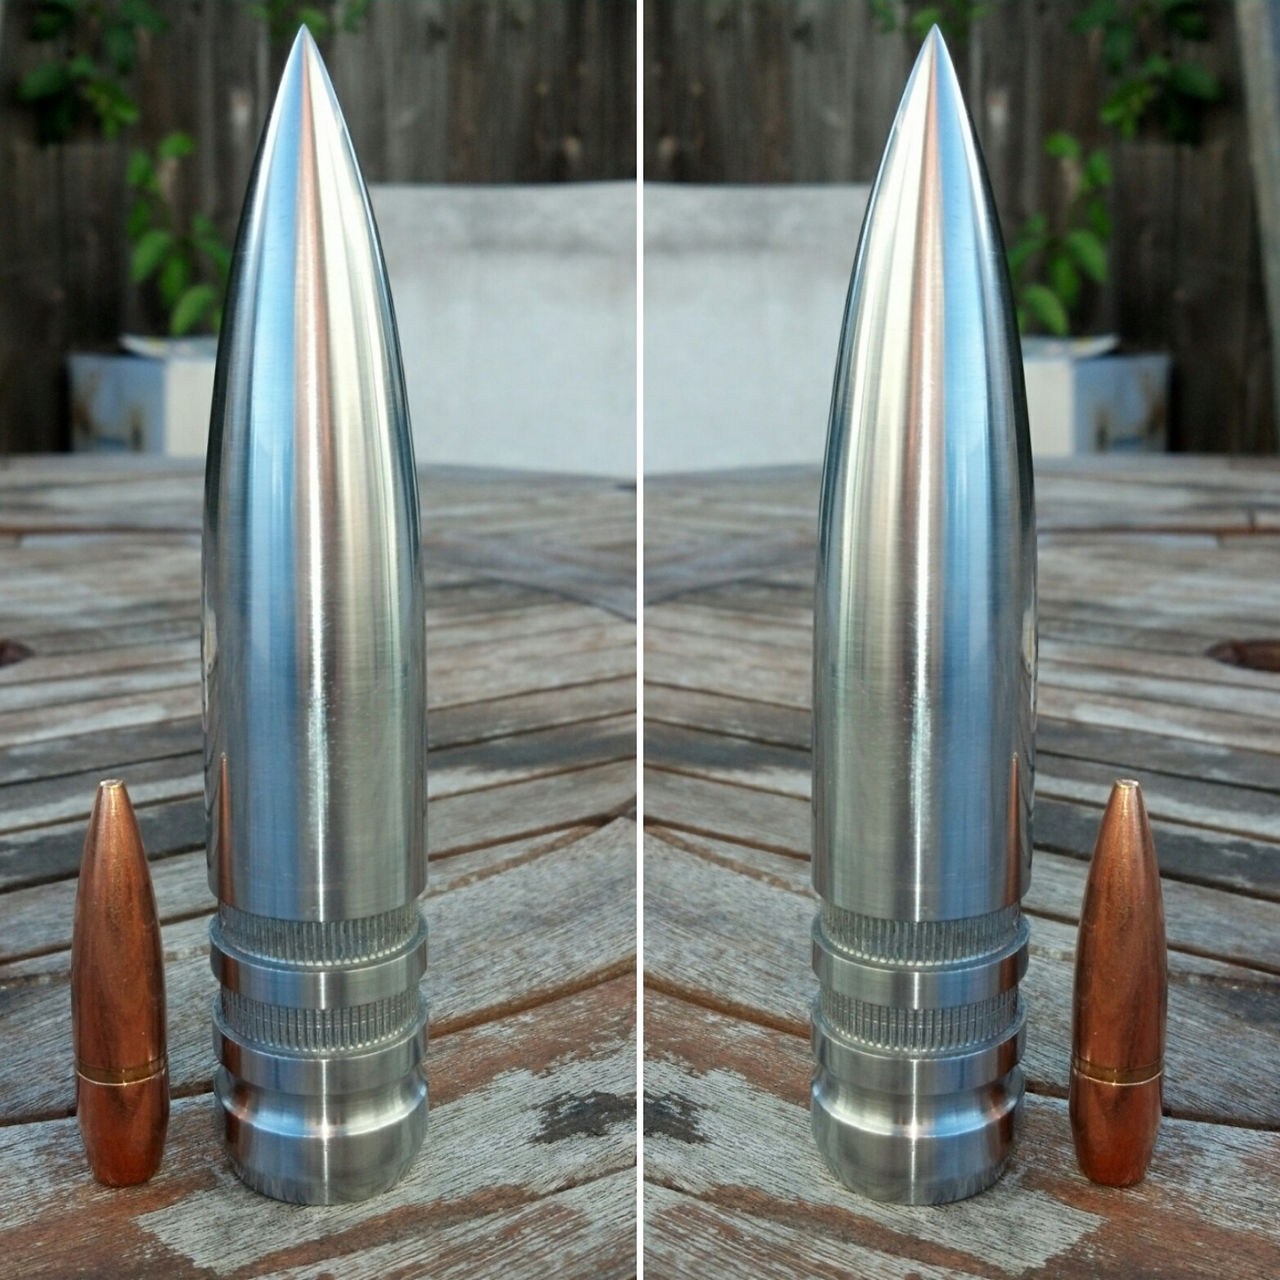 50 Cal vs 30MM rounds.